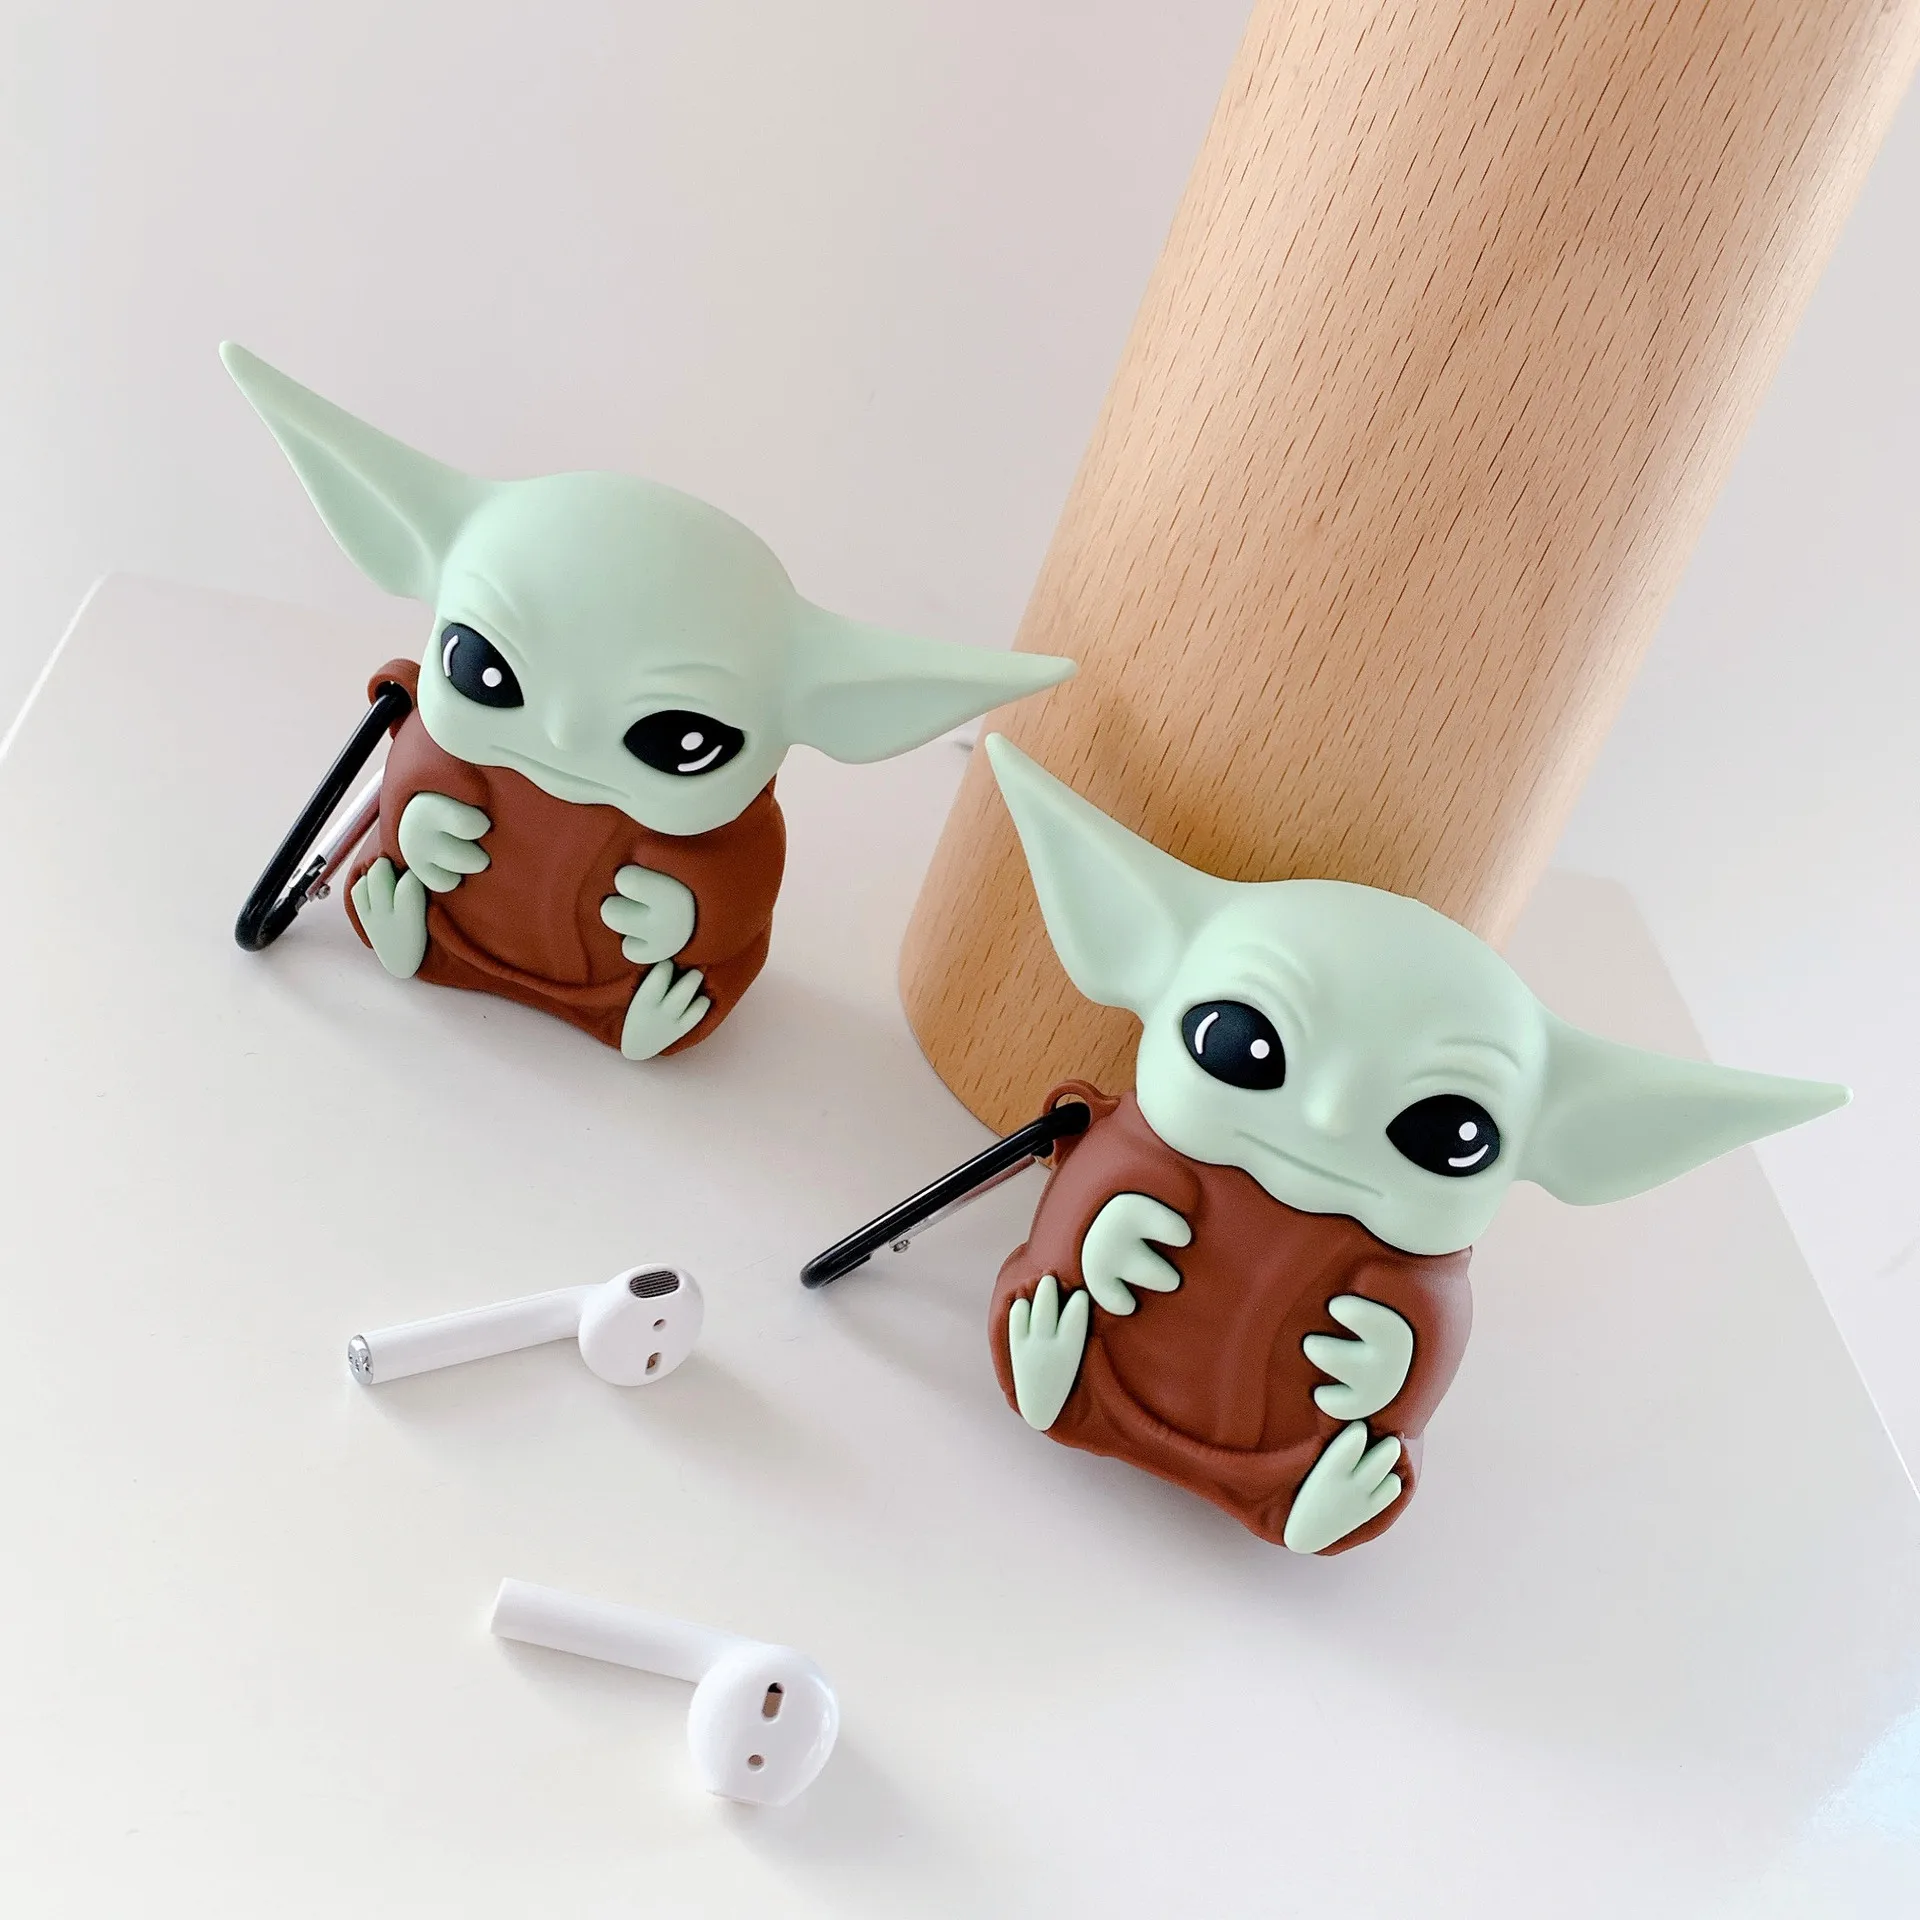 

Hot Sale 3D Cute Grogu Yoda Baby Earphone Case with Keychain for Airpods Pro Cartoon Mandalorian Protective Cover for Airpod 1/2, As pictures show